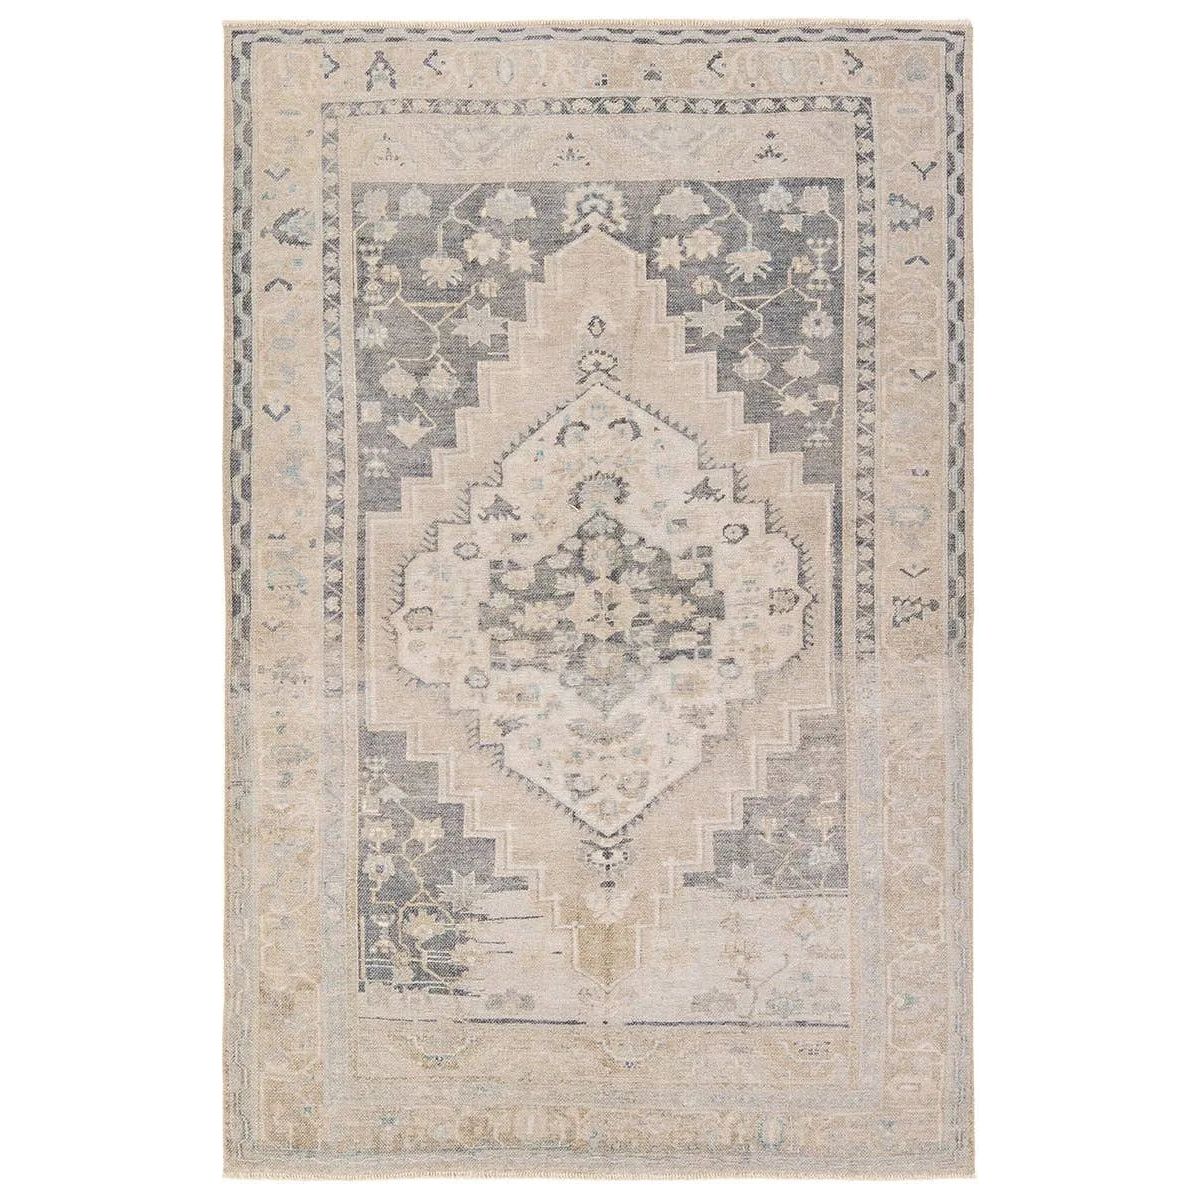 Distressed, vintage designs offer an elevated tone for the Lumal Collection. The Pasin rug features an updated traditional inspired medallion and multiple floral borders in tones of navy, light green, cream, gray, and tan. This machine washable rug is stain resistant and easy to clean, perfect for homes with children and pets. Amethyst Home provides interior design, new home construction design consulting, vintage area rugs, and lighting in the Houston metro area.